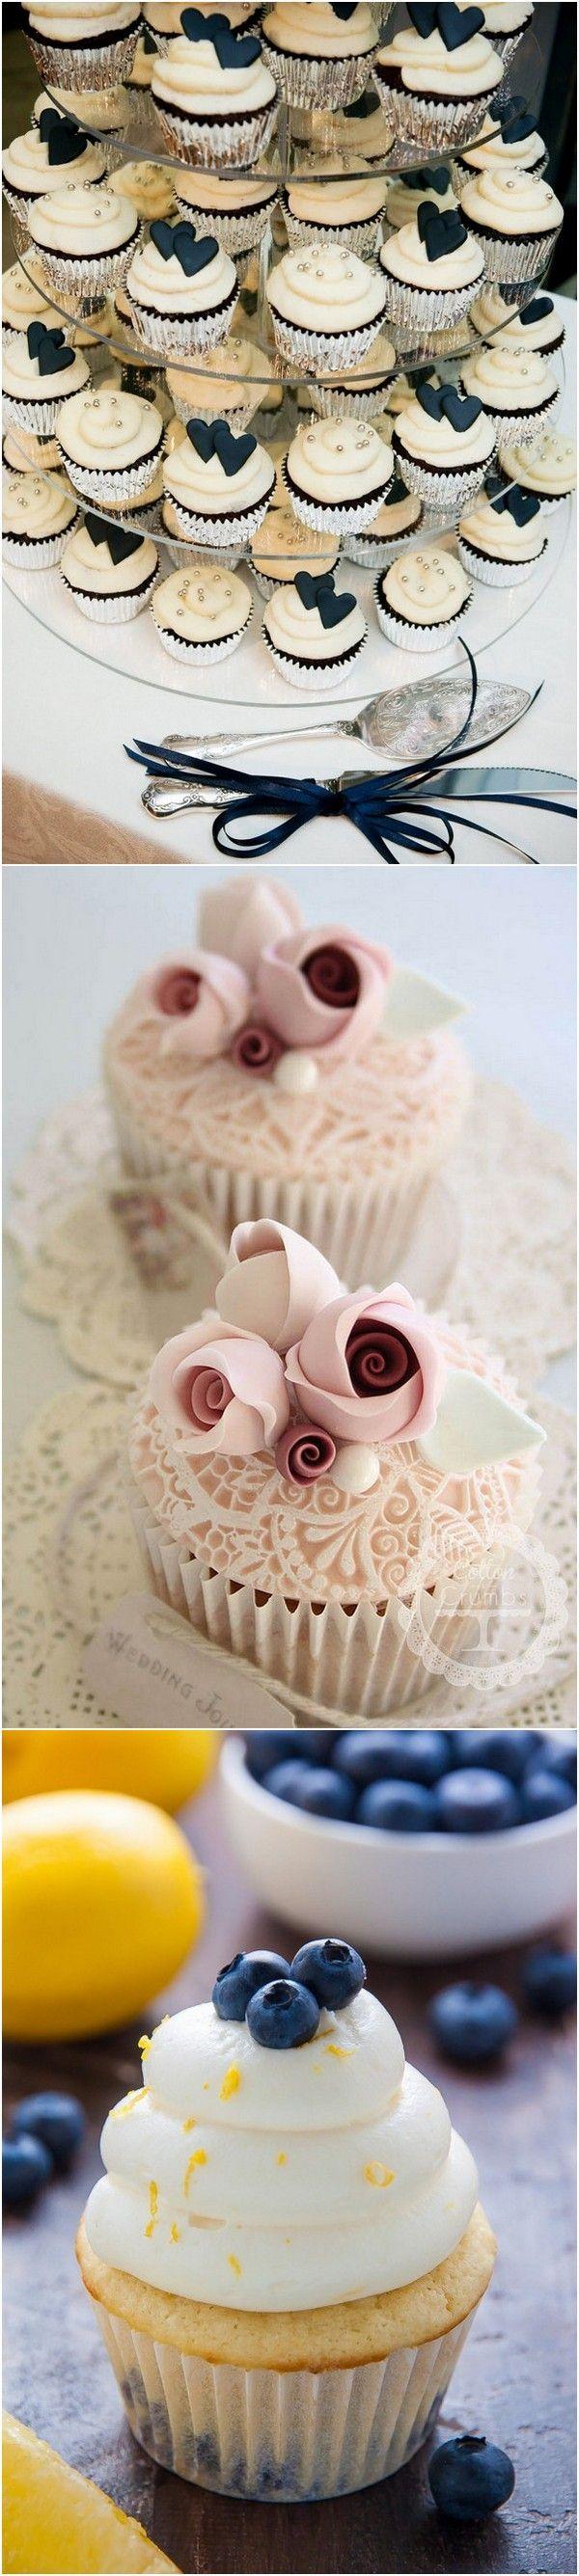 Mariage - 24 Creative Wedding Cupcake Ideas For Your Big Day - Page 2 Of 3